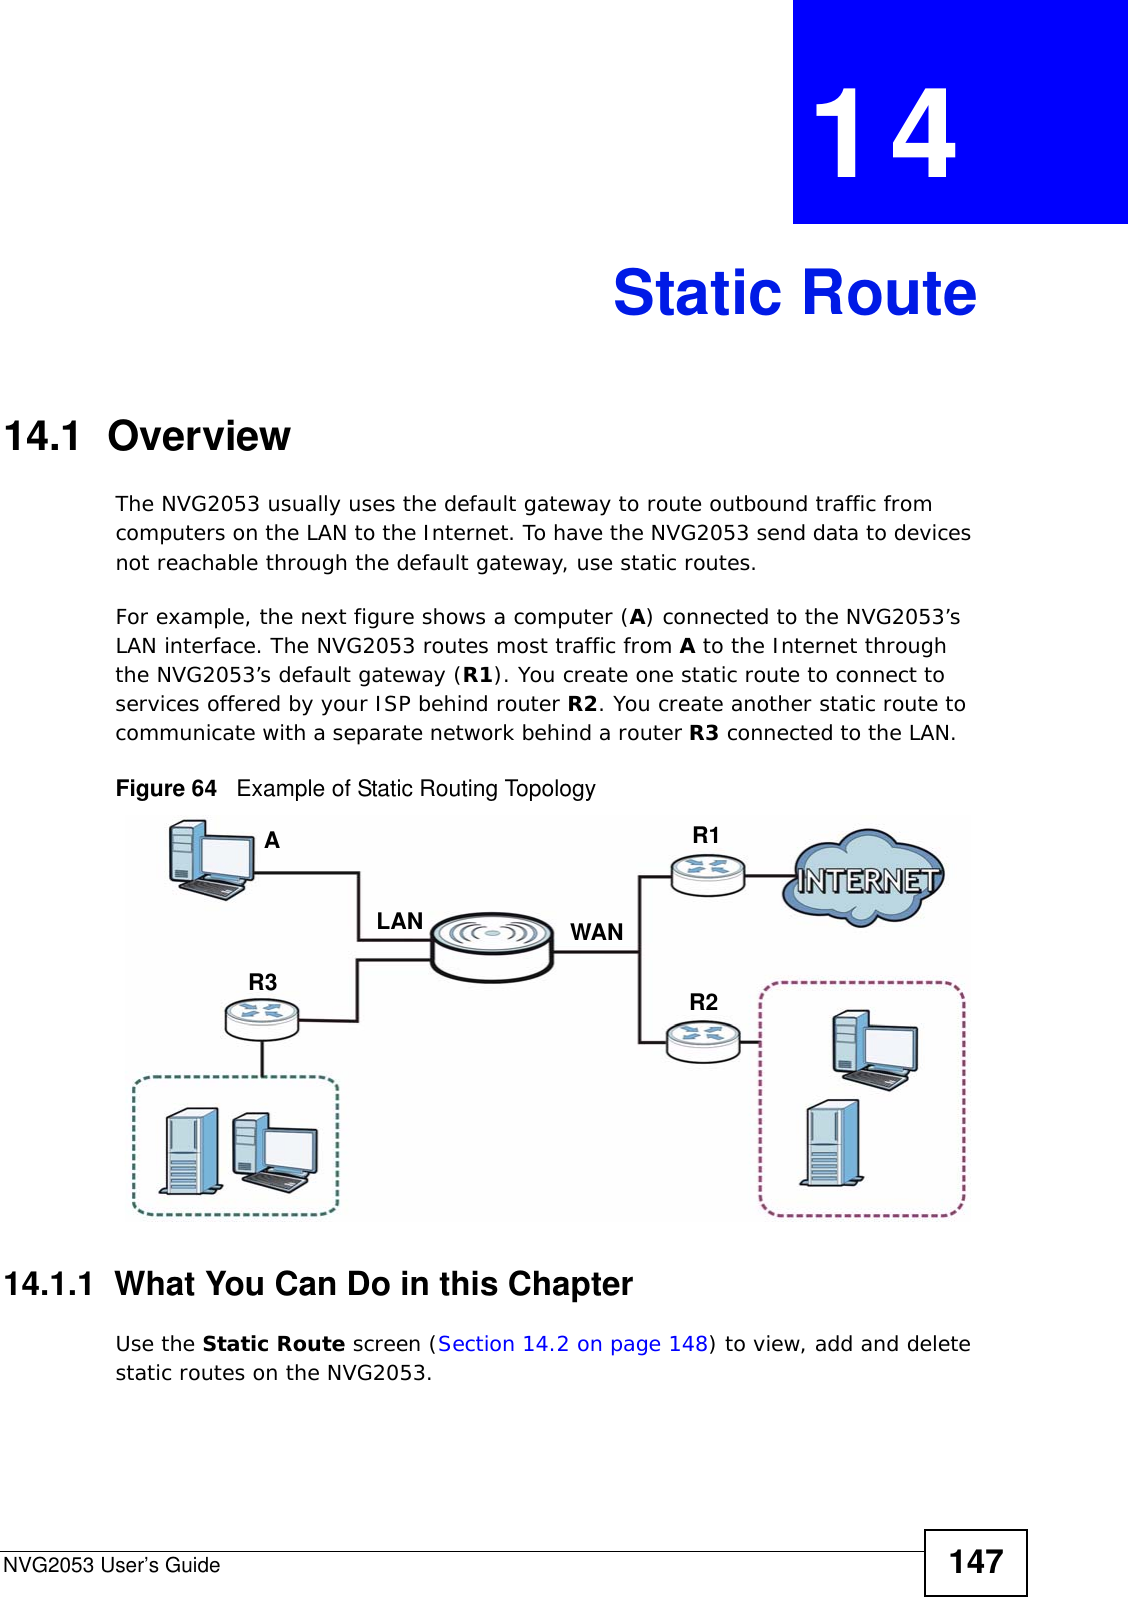 NVG2053 User’s Guide 147CHAPTER  14 Static Route14.1  Overview   The NVG2053 usually uses the default gateway to route outbound traffic from computers on the LAN to the Internet. To have the NVG2053 send data to devices not reachable through the default gateway, use static routes.For example, the next figure shows a computer (A) connected to the NVG2053’s LAN interface. The NVG2053 routes most traffic from A to the Internet through the NVG2053’s default gateway (R1). You create one static route to connect to services offered by your ISP behind router R2. You create another static route to communicate with a separate network behind a router R3 connected to the LAN.   Figure 64   Example of Static Routing Topology14.1.1  What You Can Do in this ChapterUse the Static Route screen (Section 14.2 on page 148) to view, add and delete static routes on the NVG2053.AR1R2R3LAN WAN